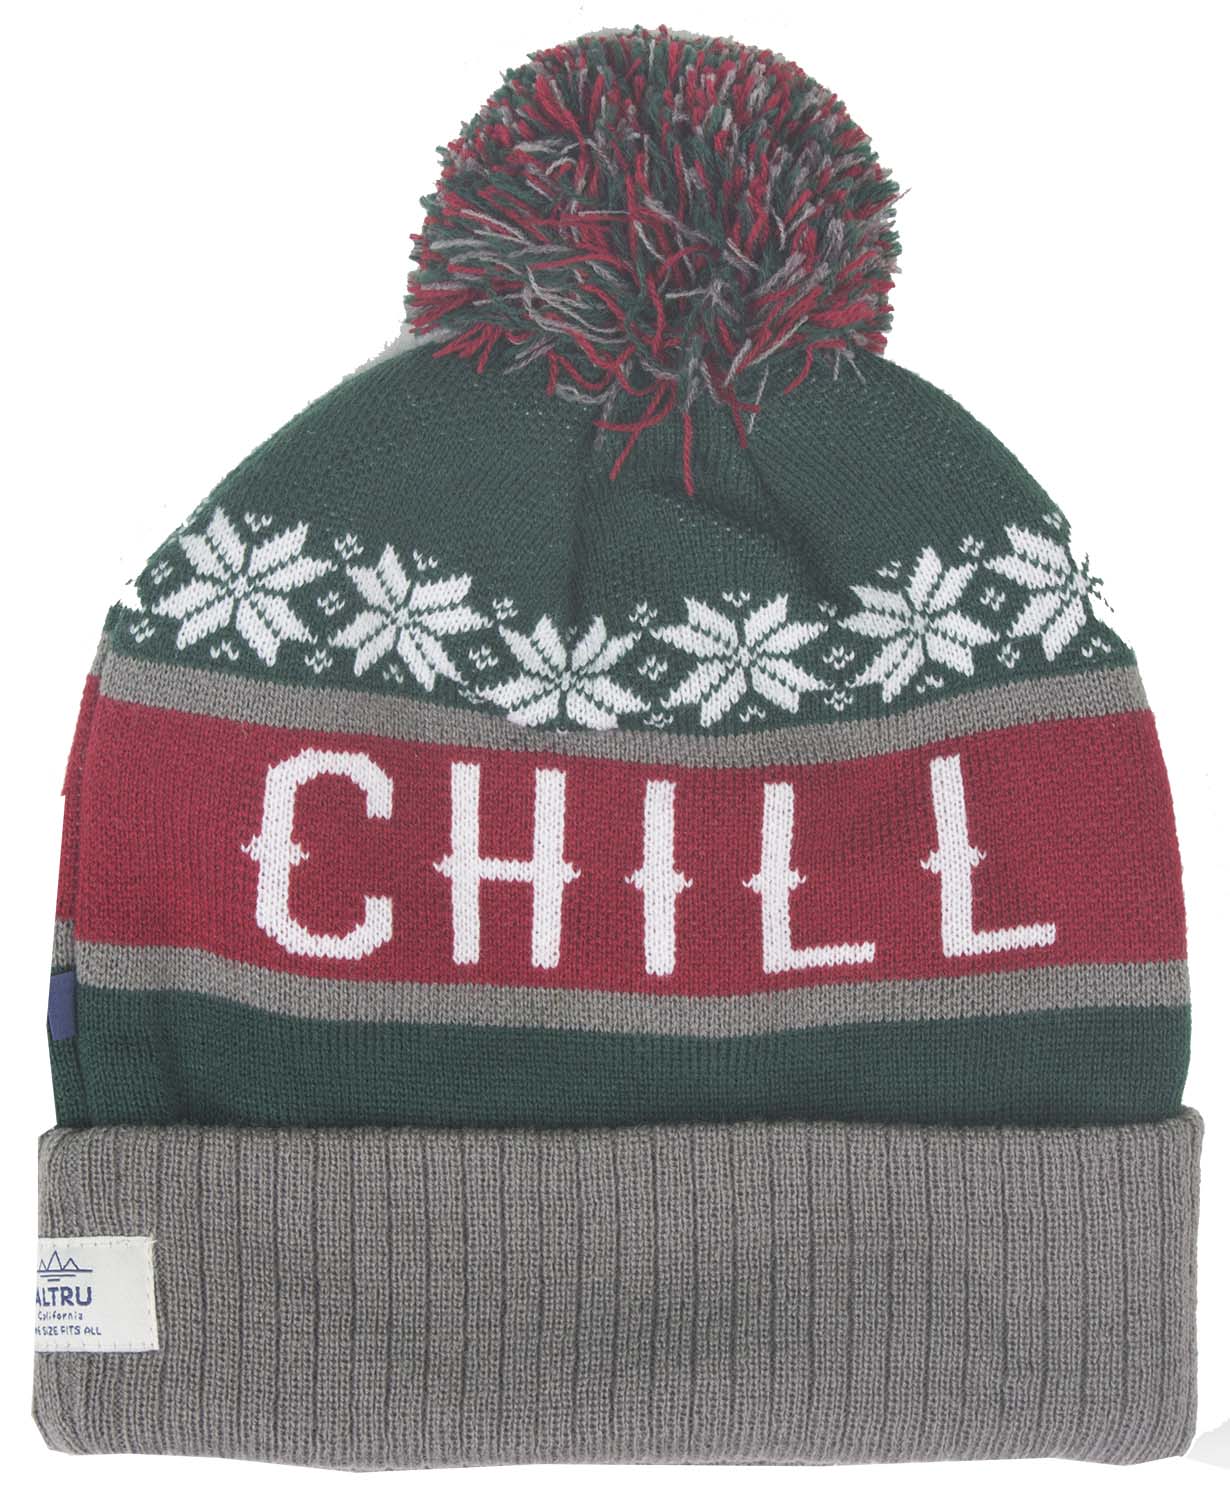 CHILL green and red knit cuff beanie with pom